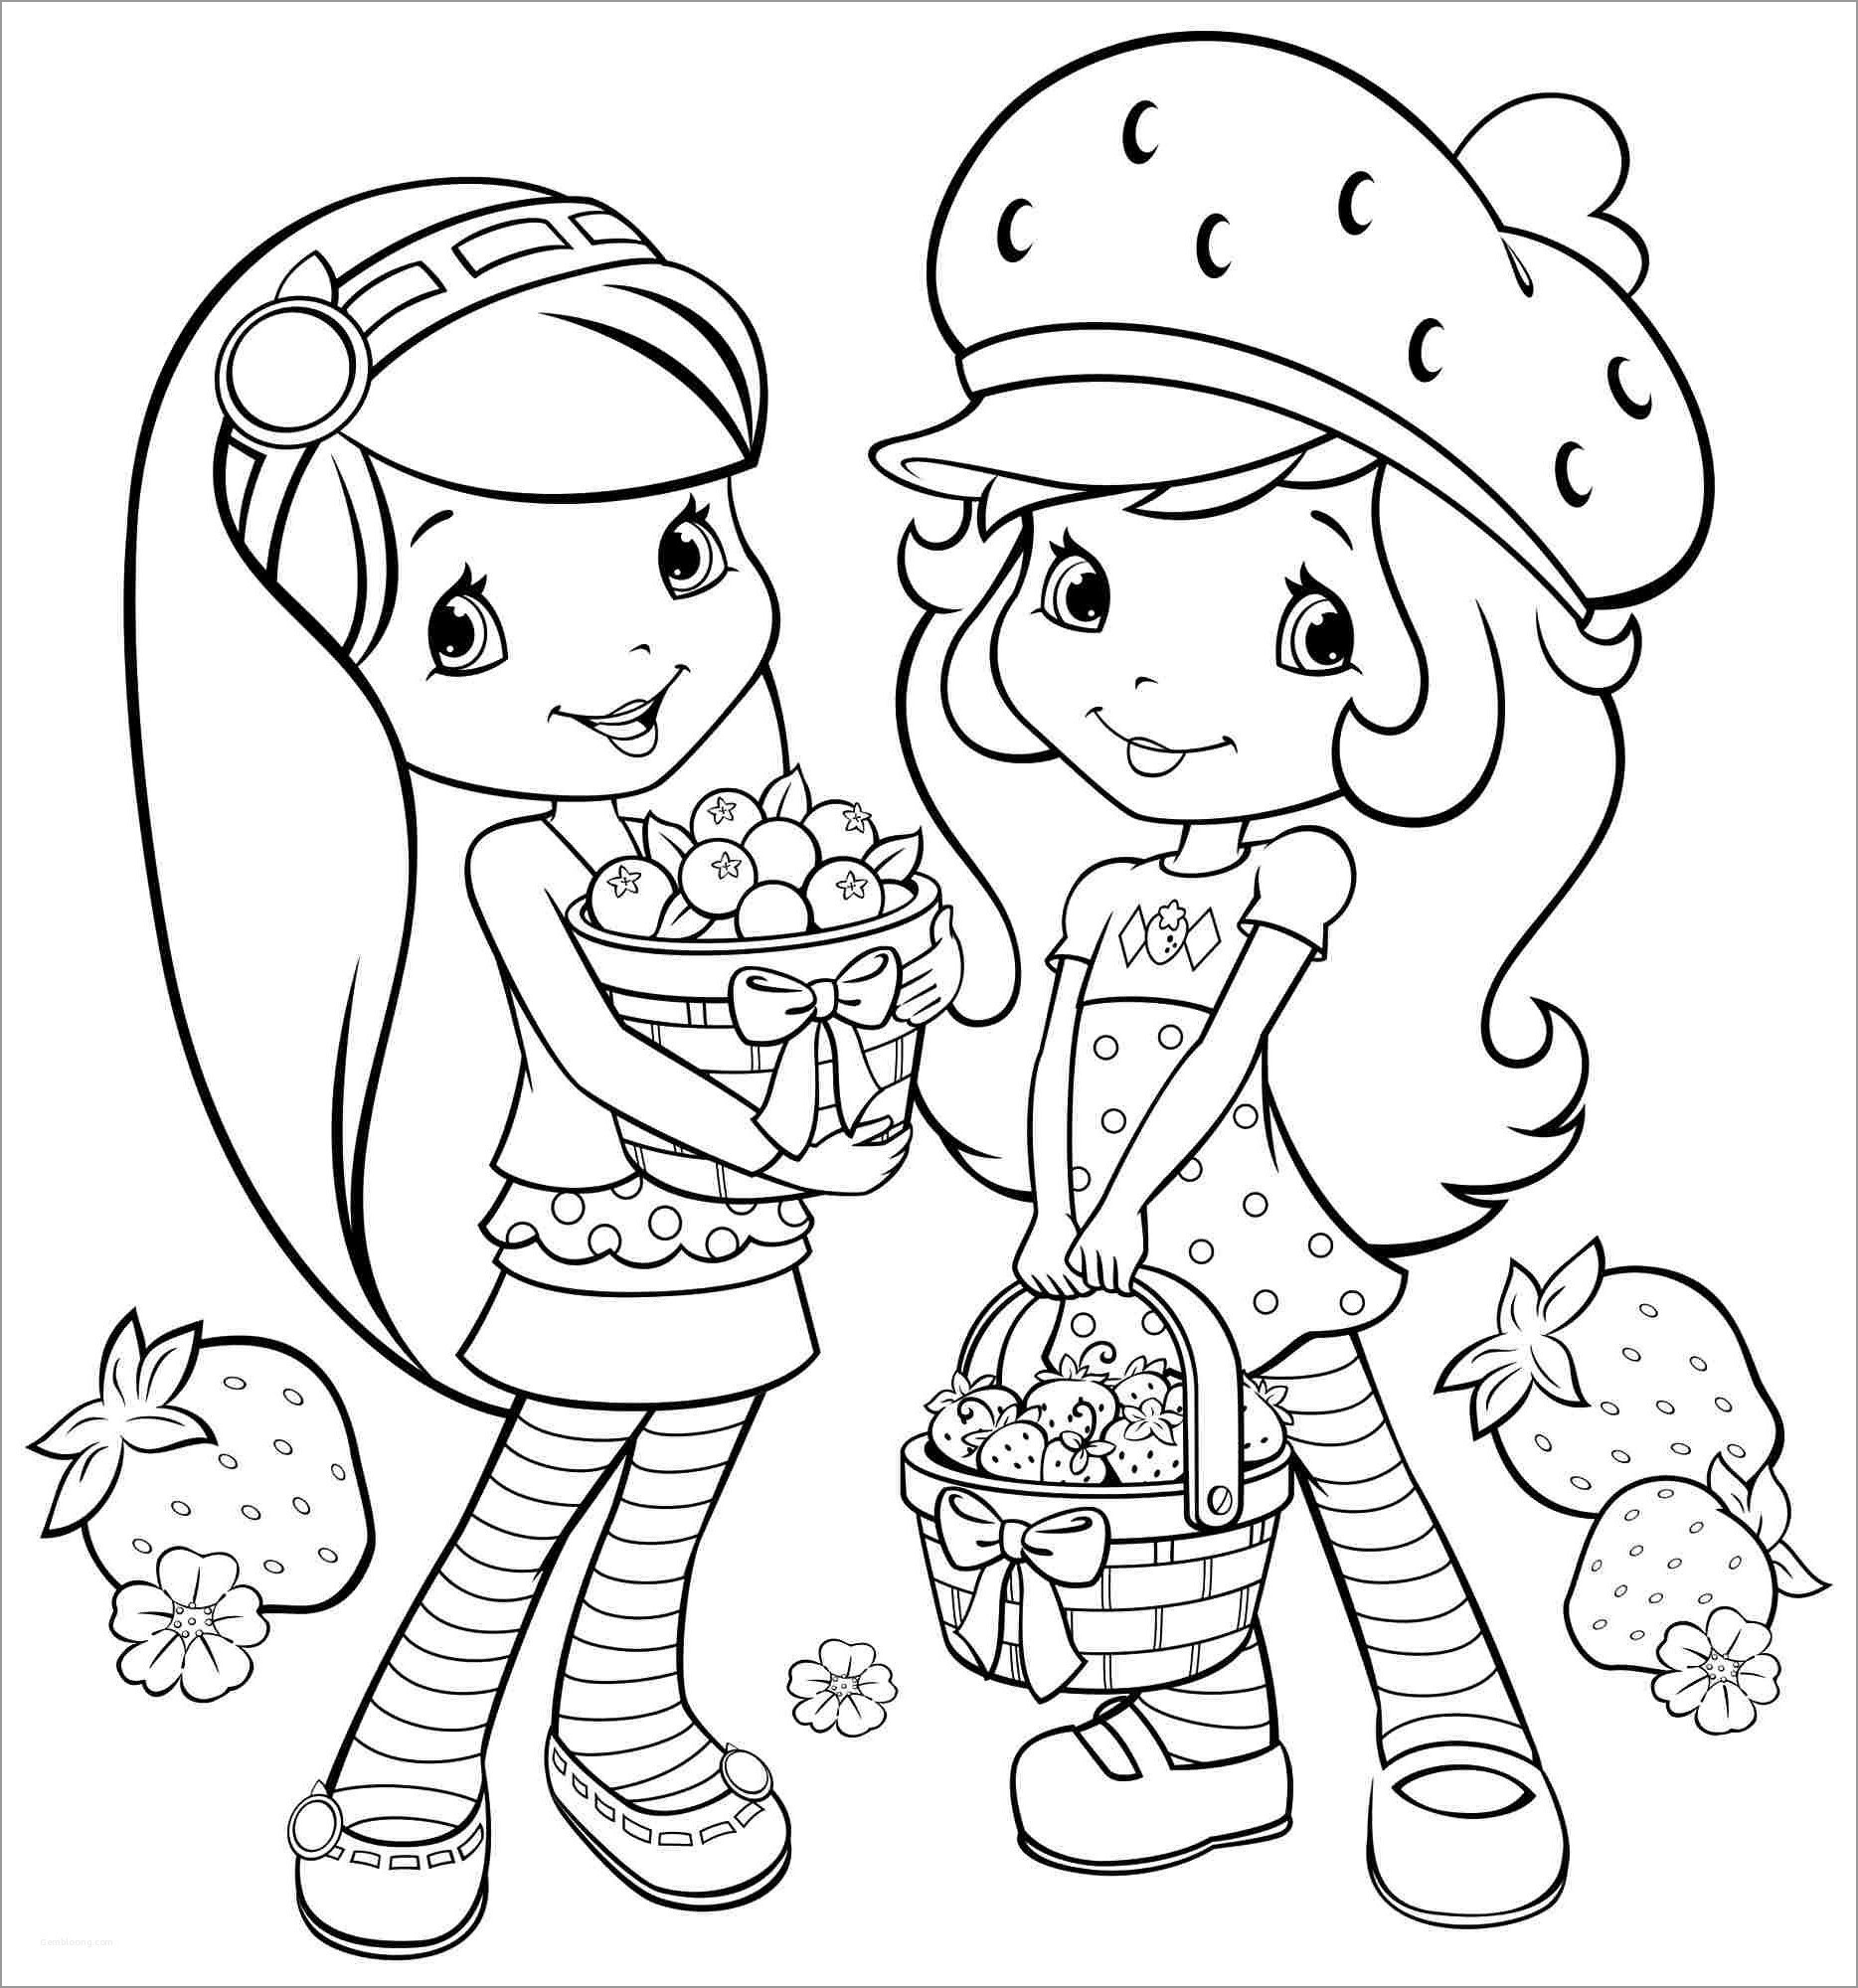 Strawberry Shortcake Coloring Pages for Girls